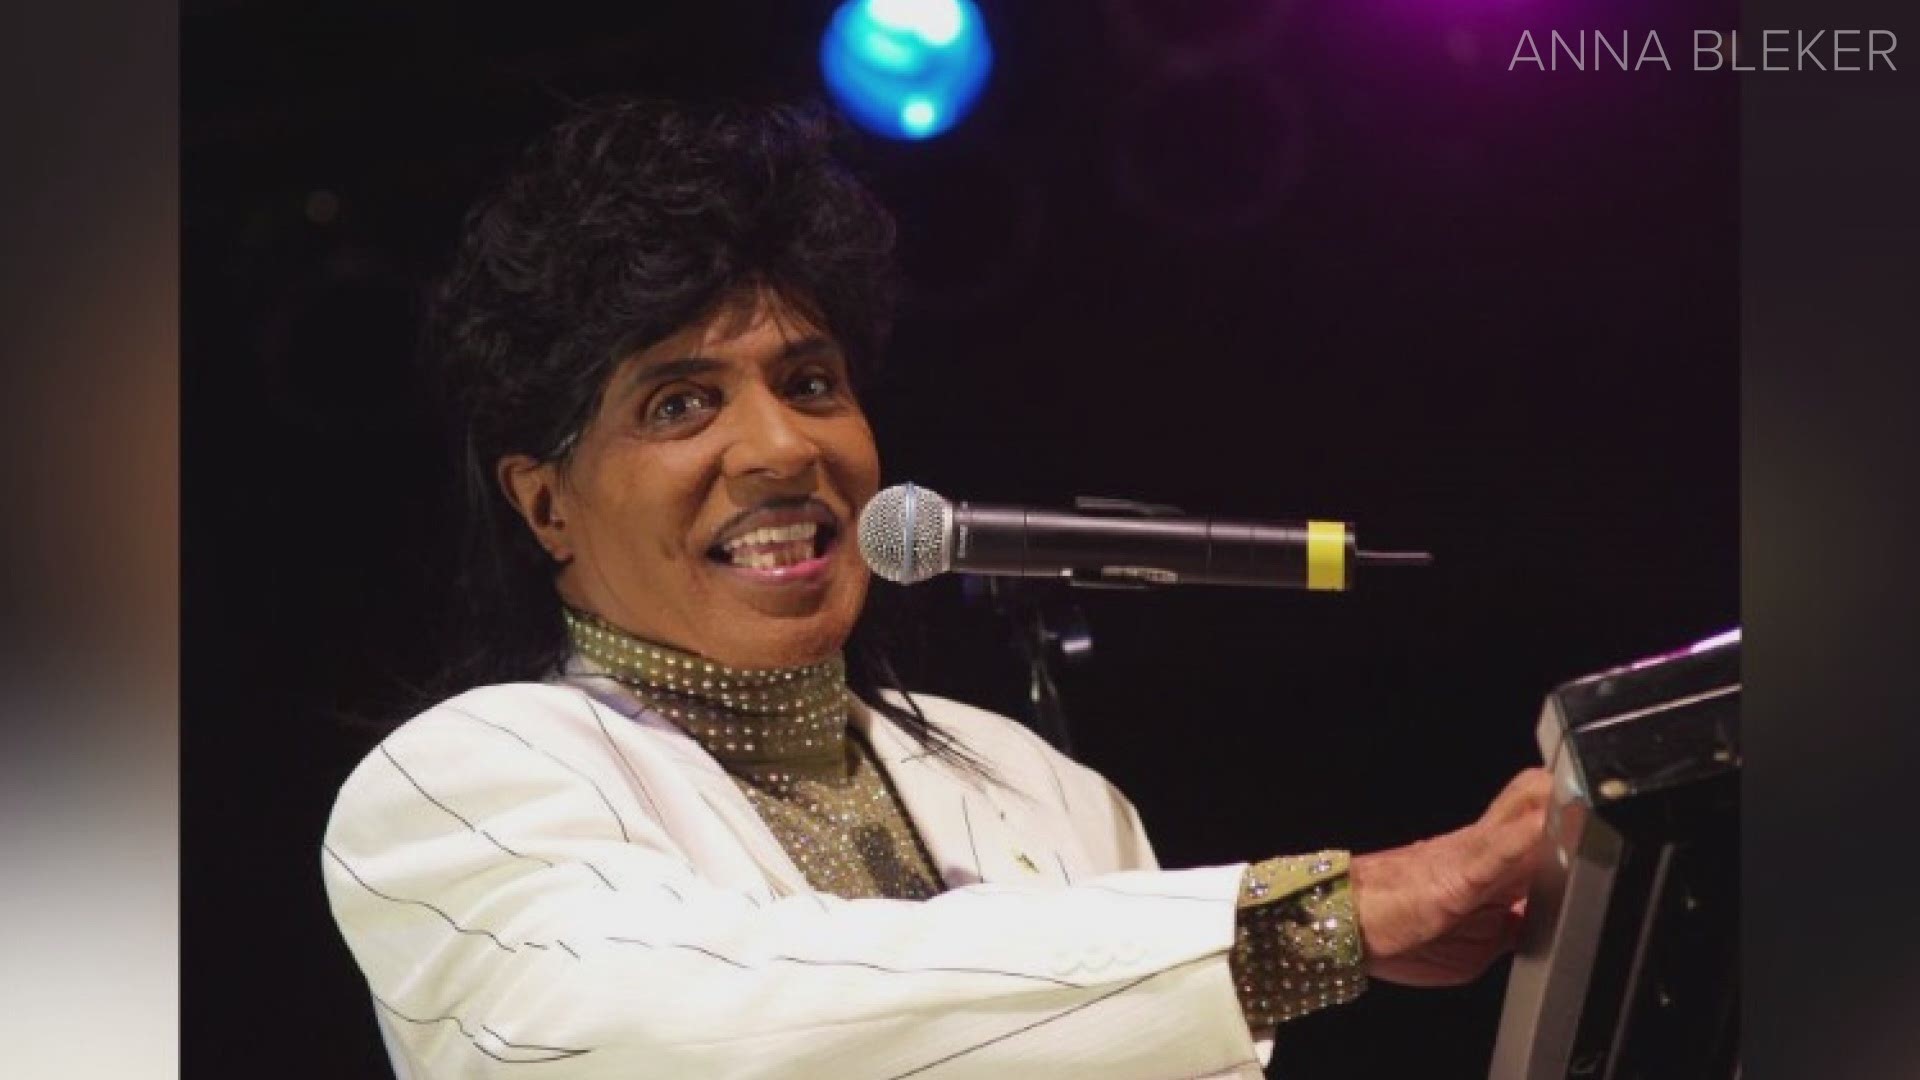 Rock legend and Macon native Little Richard passed away at the age of 87 Saturday.